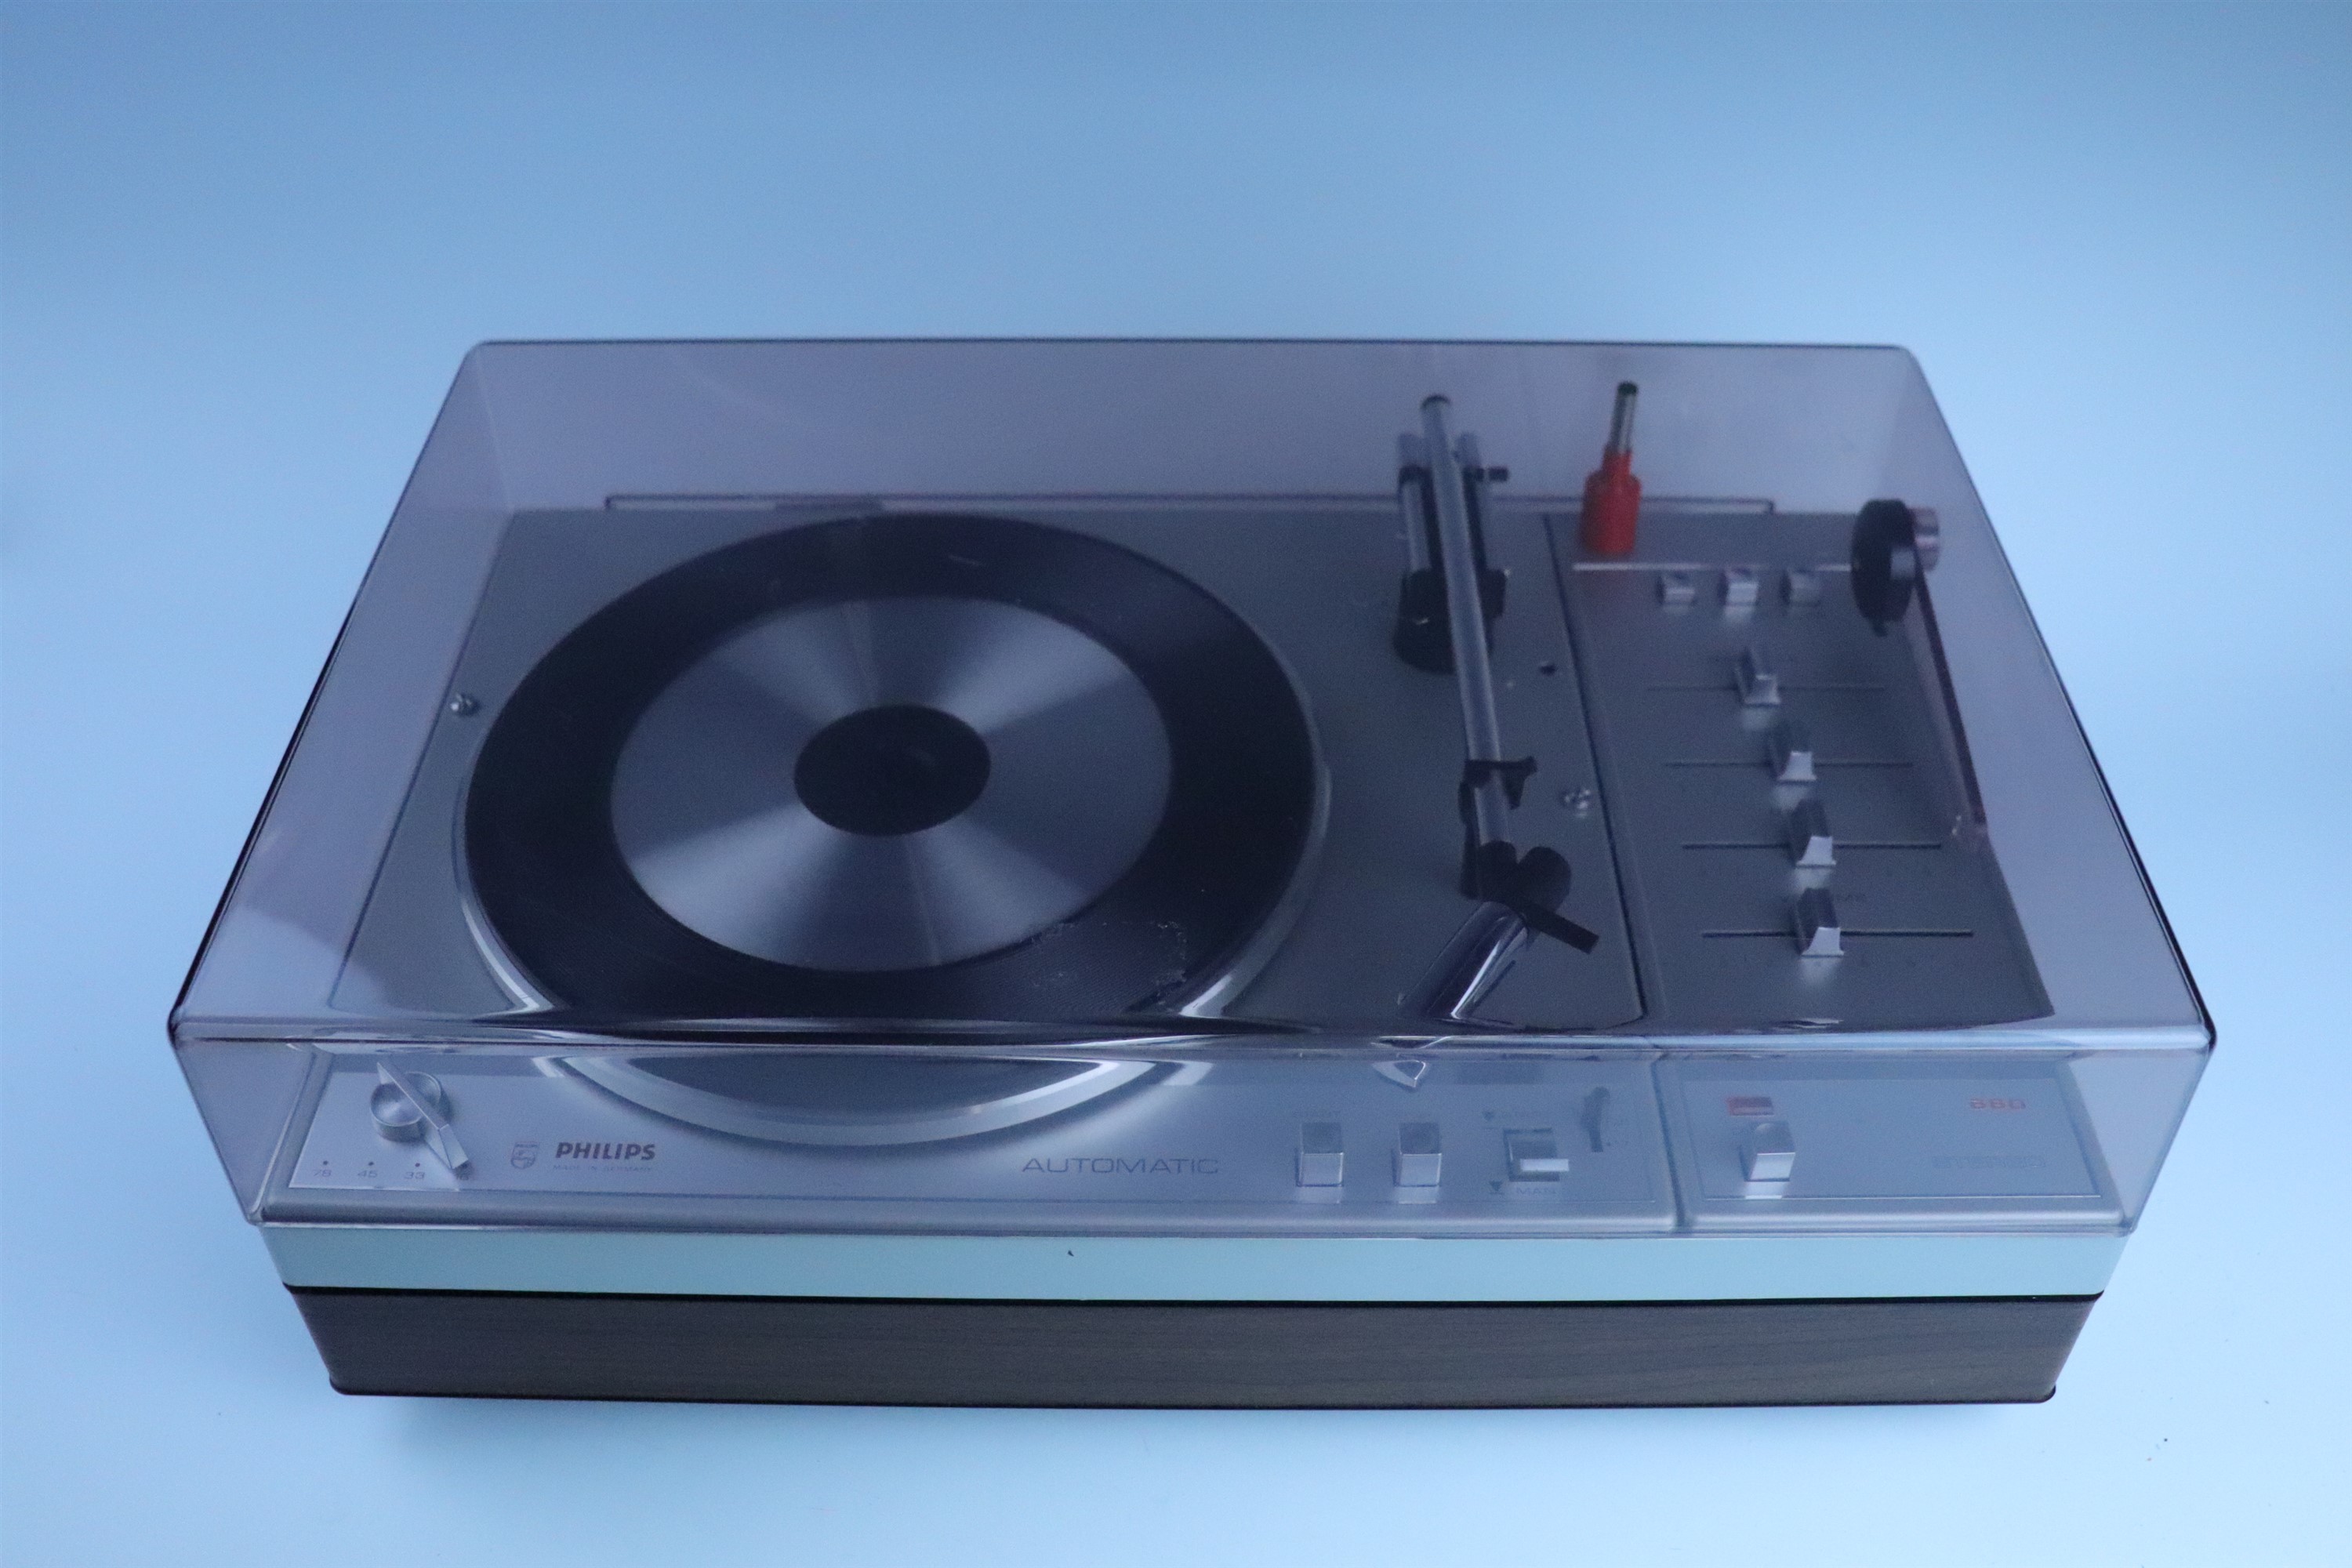 A Phillips 660 record turntable